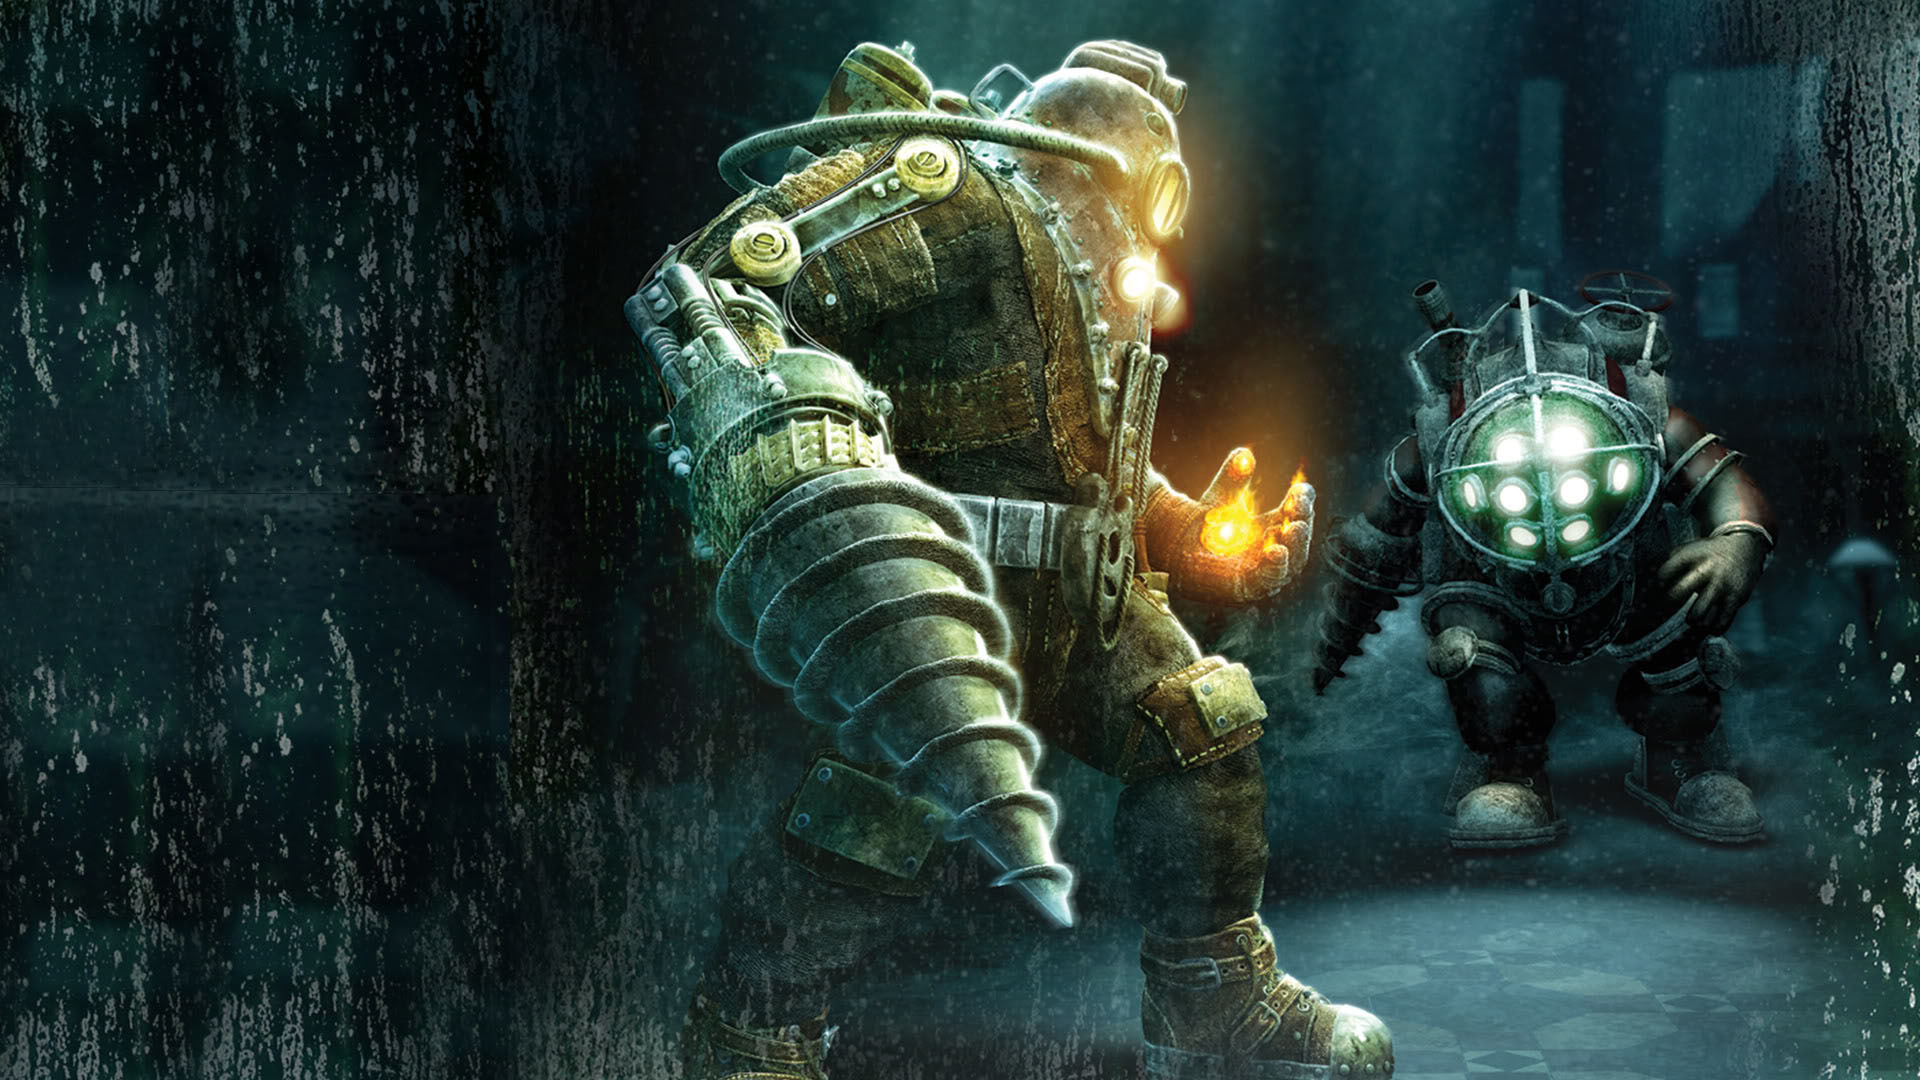 Big Daddy Vs Little Daddy   Action Rpg Games Wallpaper Image featuring